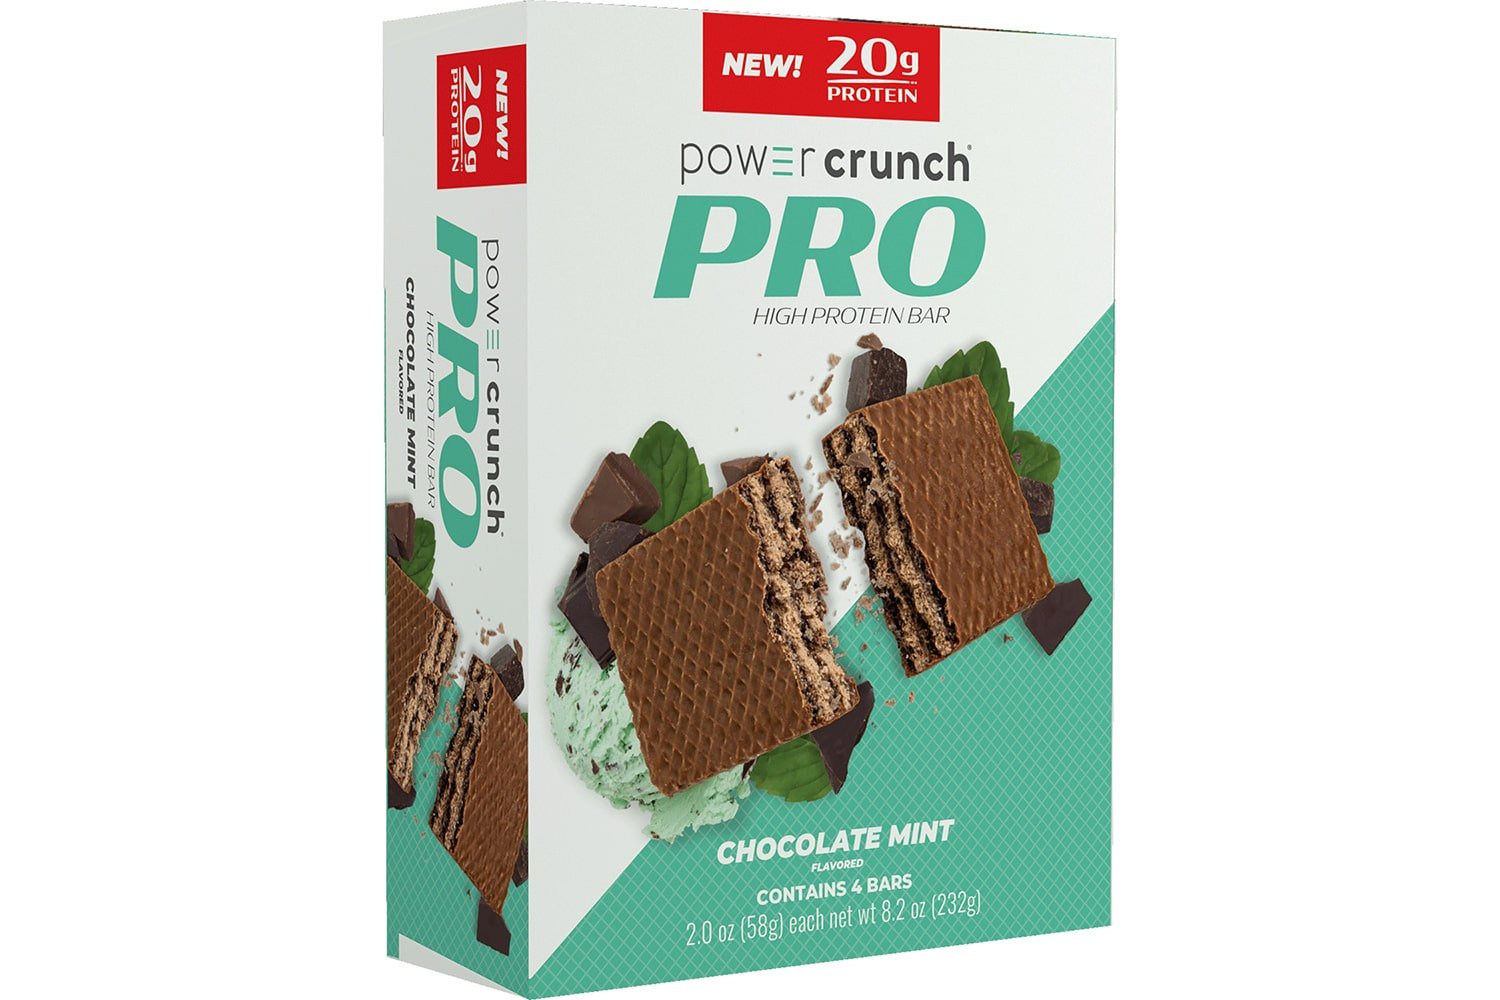 Box of Power Crunch Pro Chocolate Mint 20g protein bars